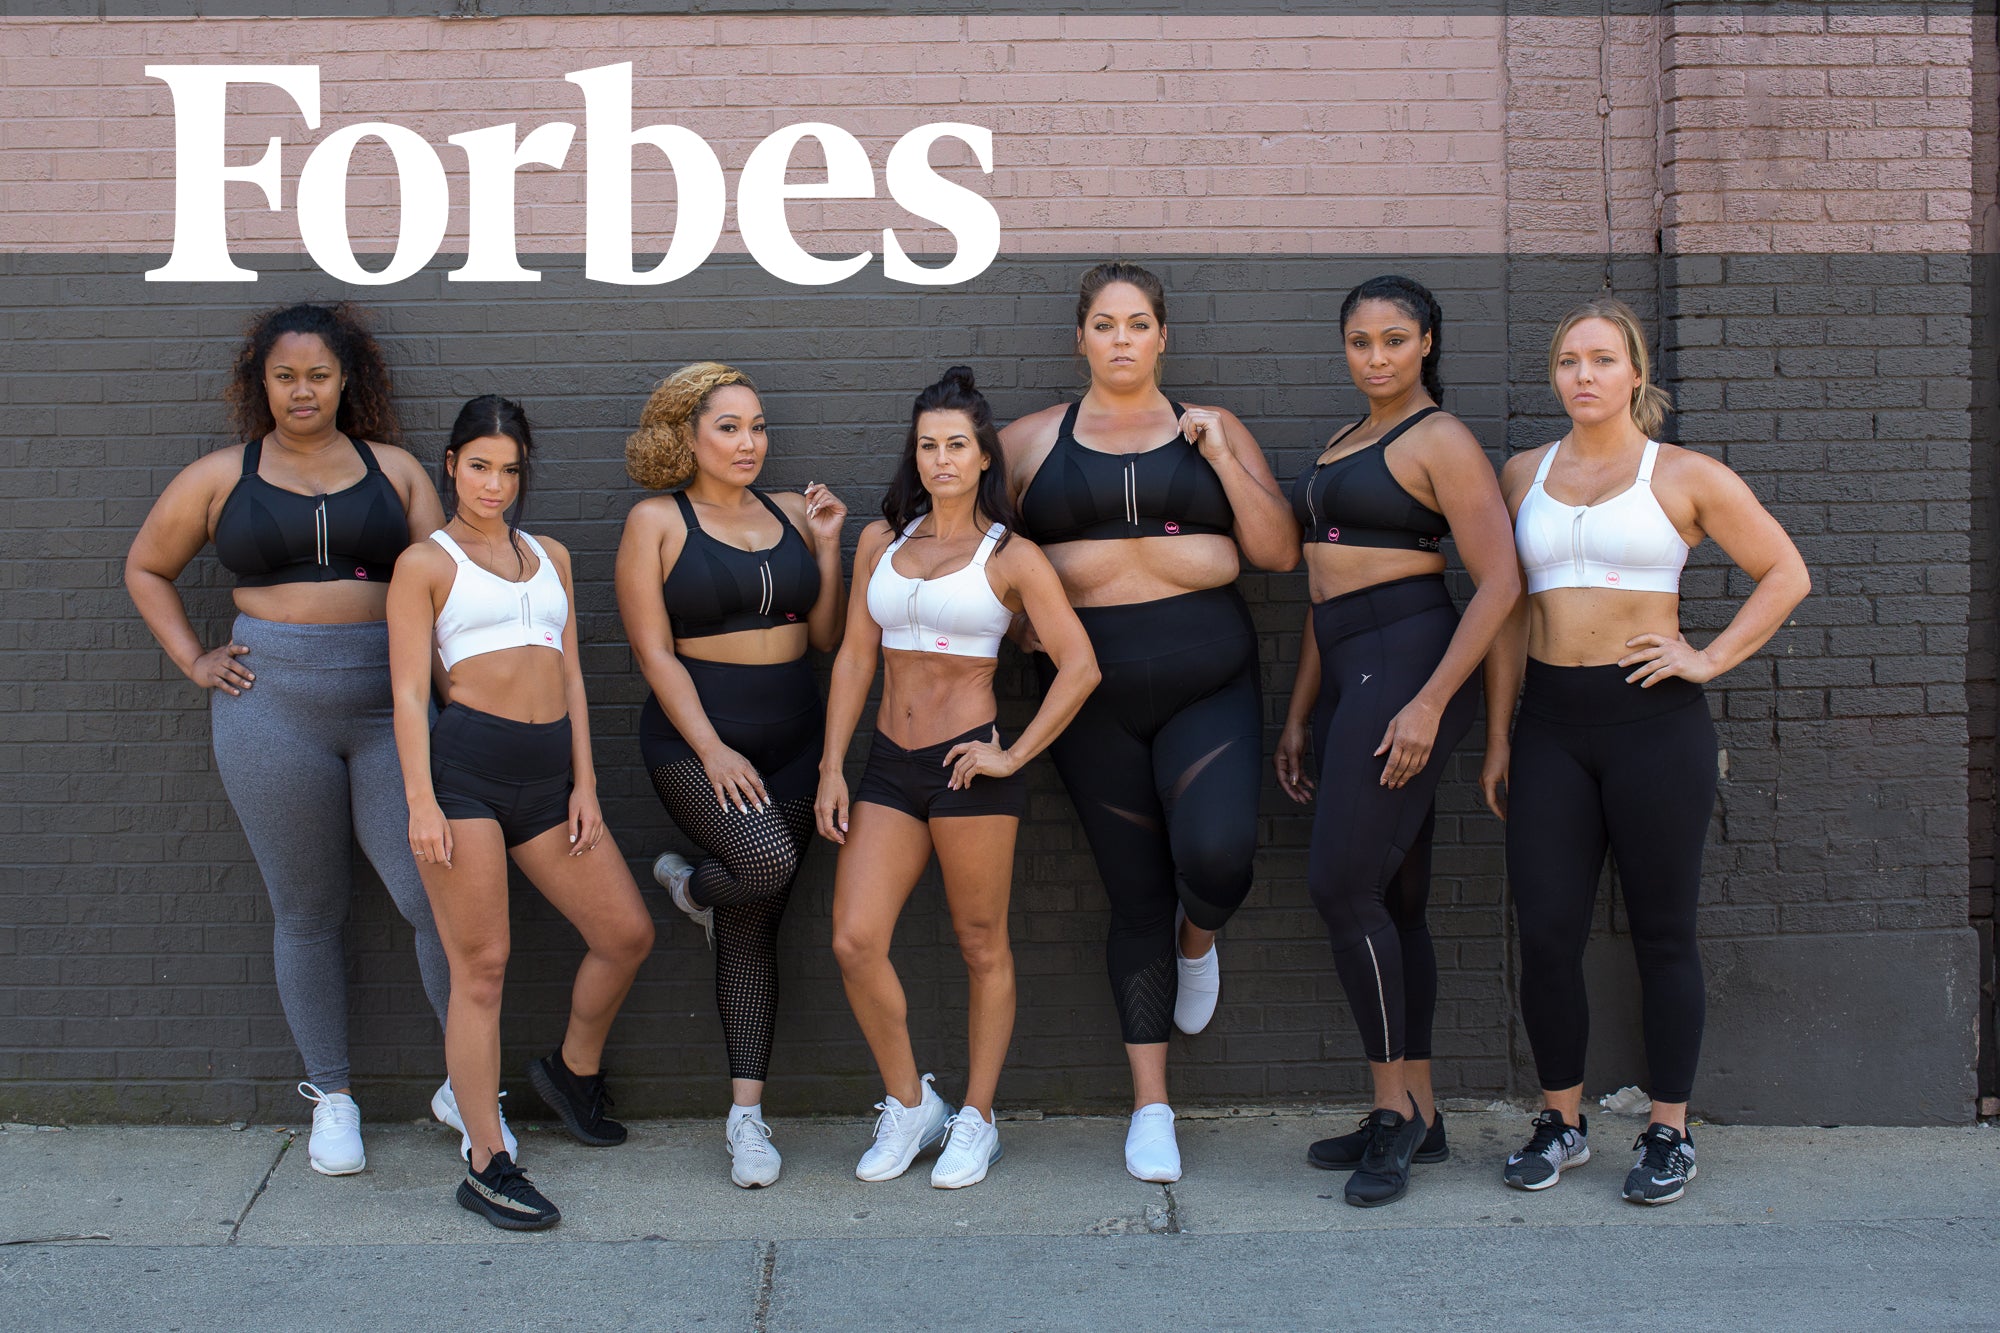 Forbes: How shefit Outperforming Leading Brands